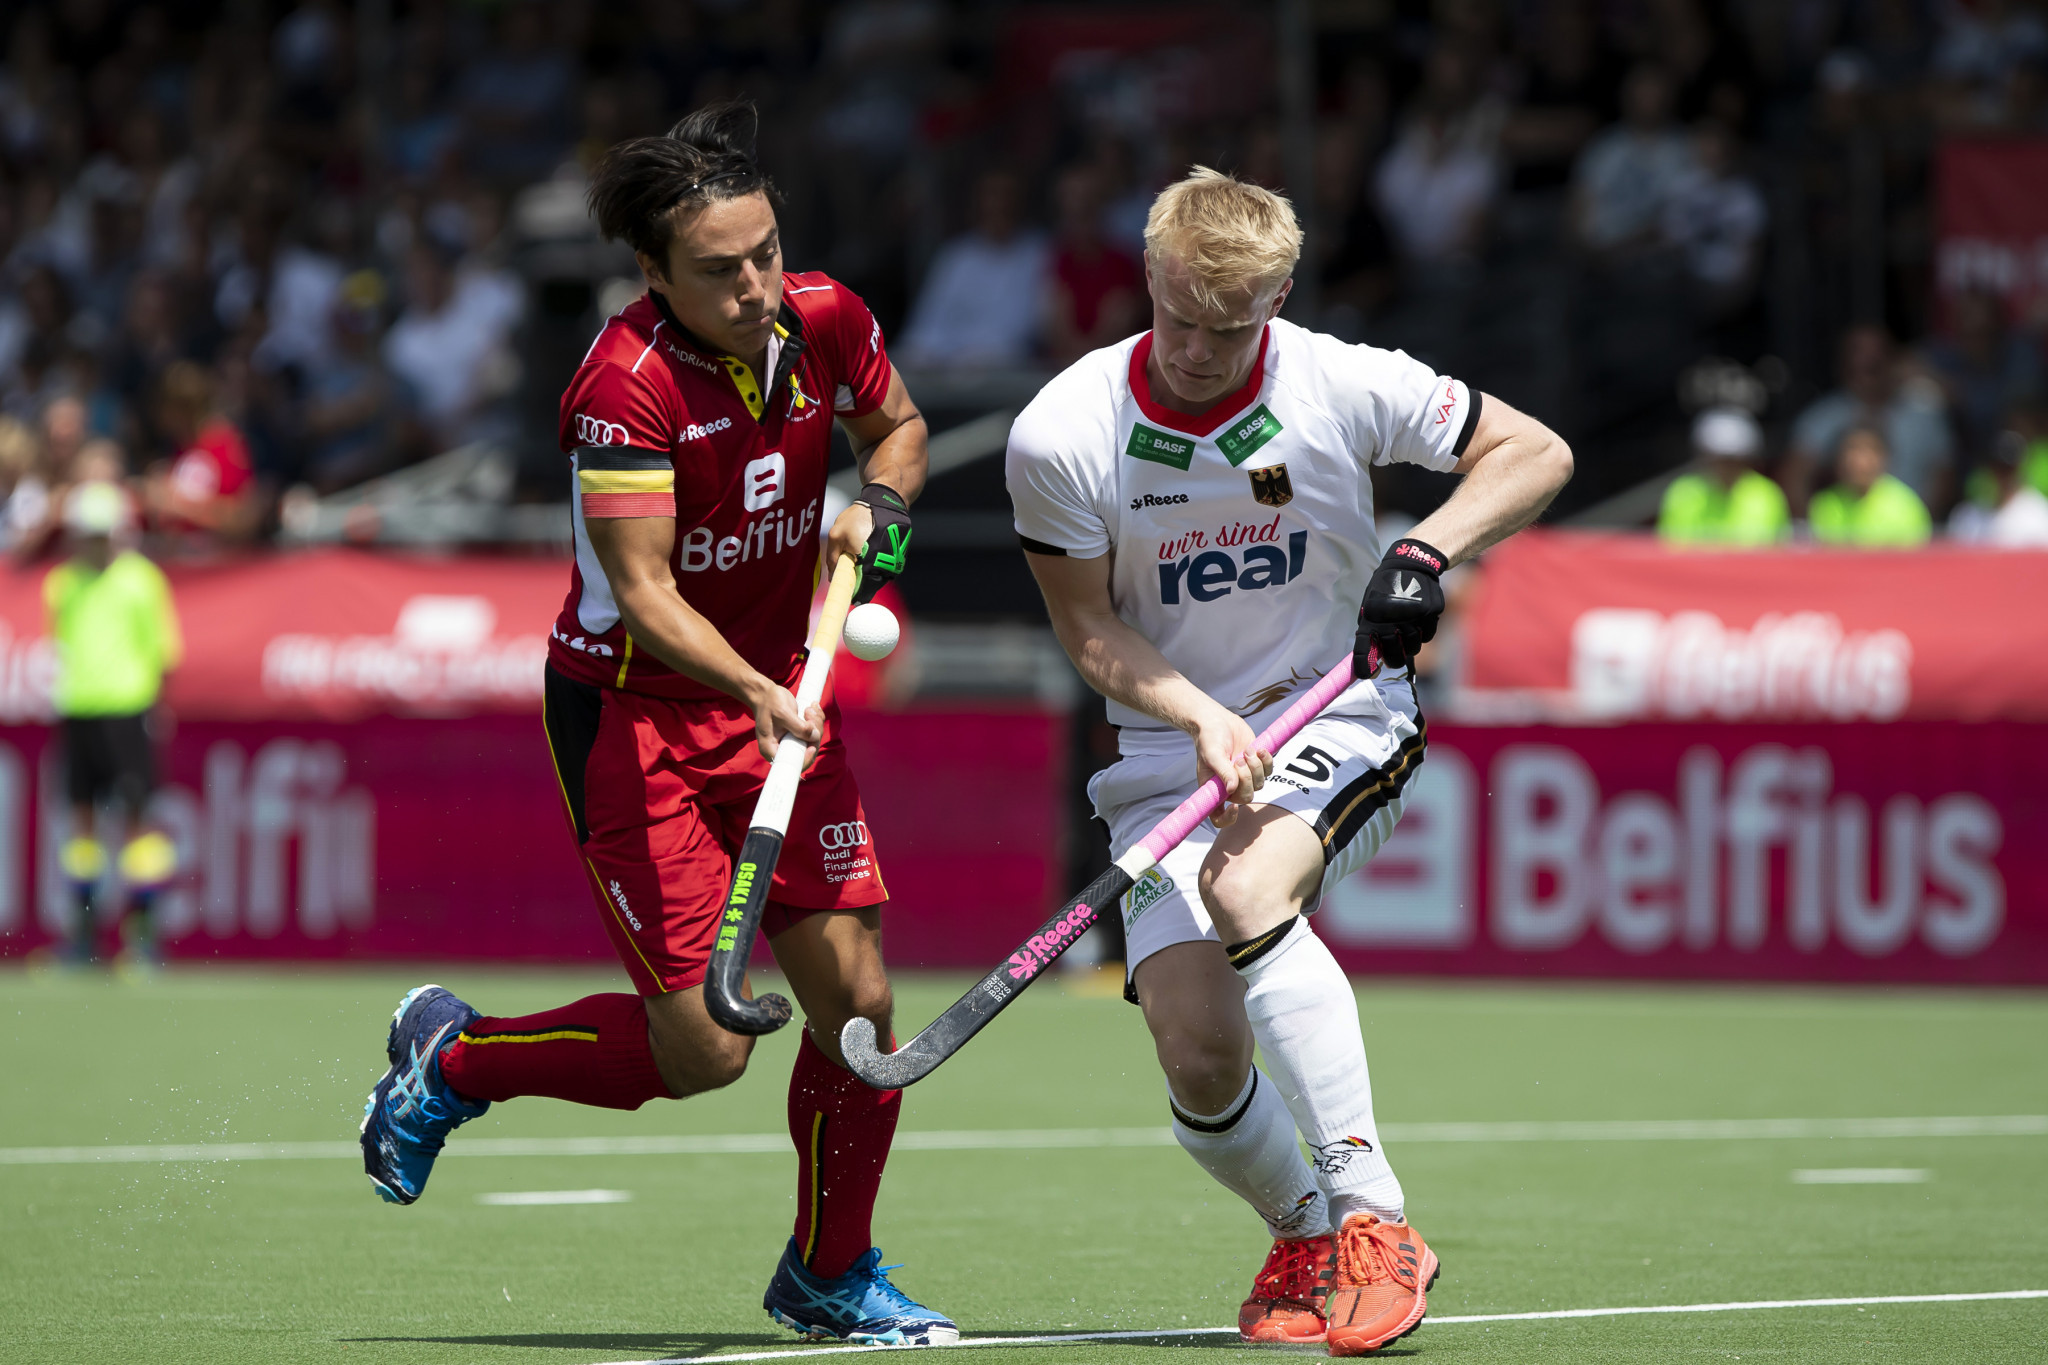 FIH to launch app to coincide with return of the Hockey Pro League